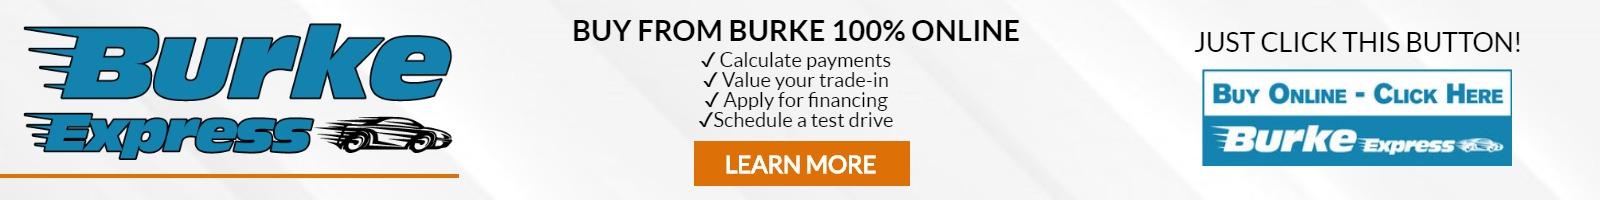 Buy From Burke 100% Online with Burke Express